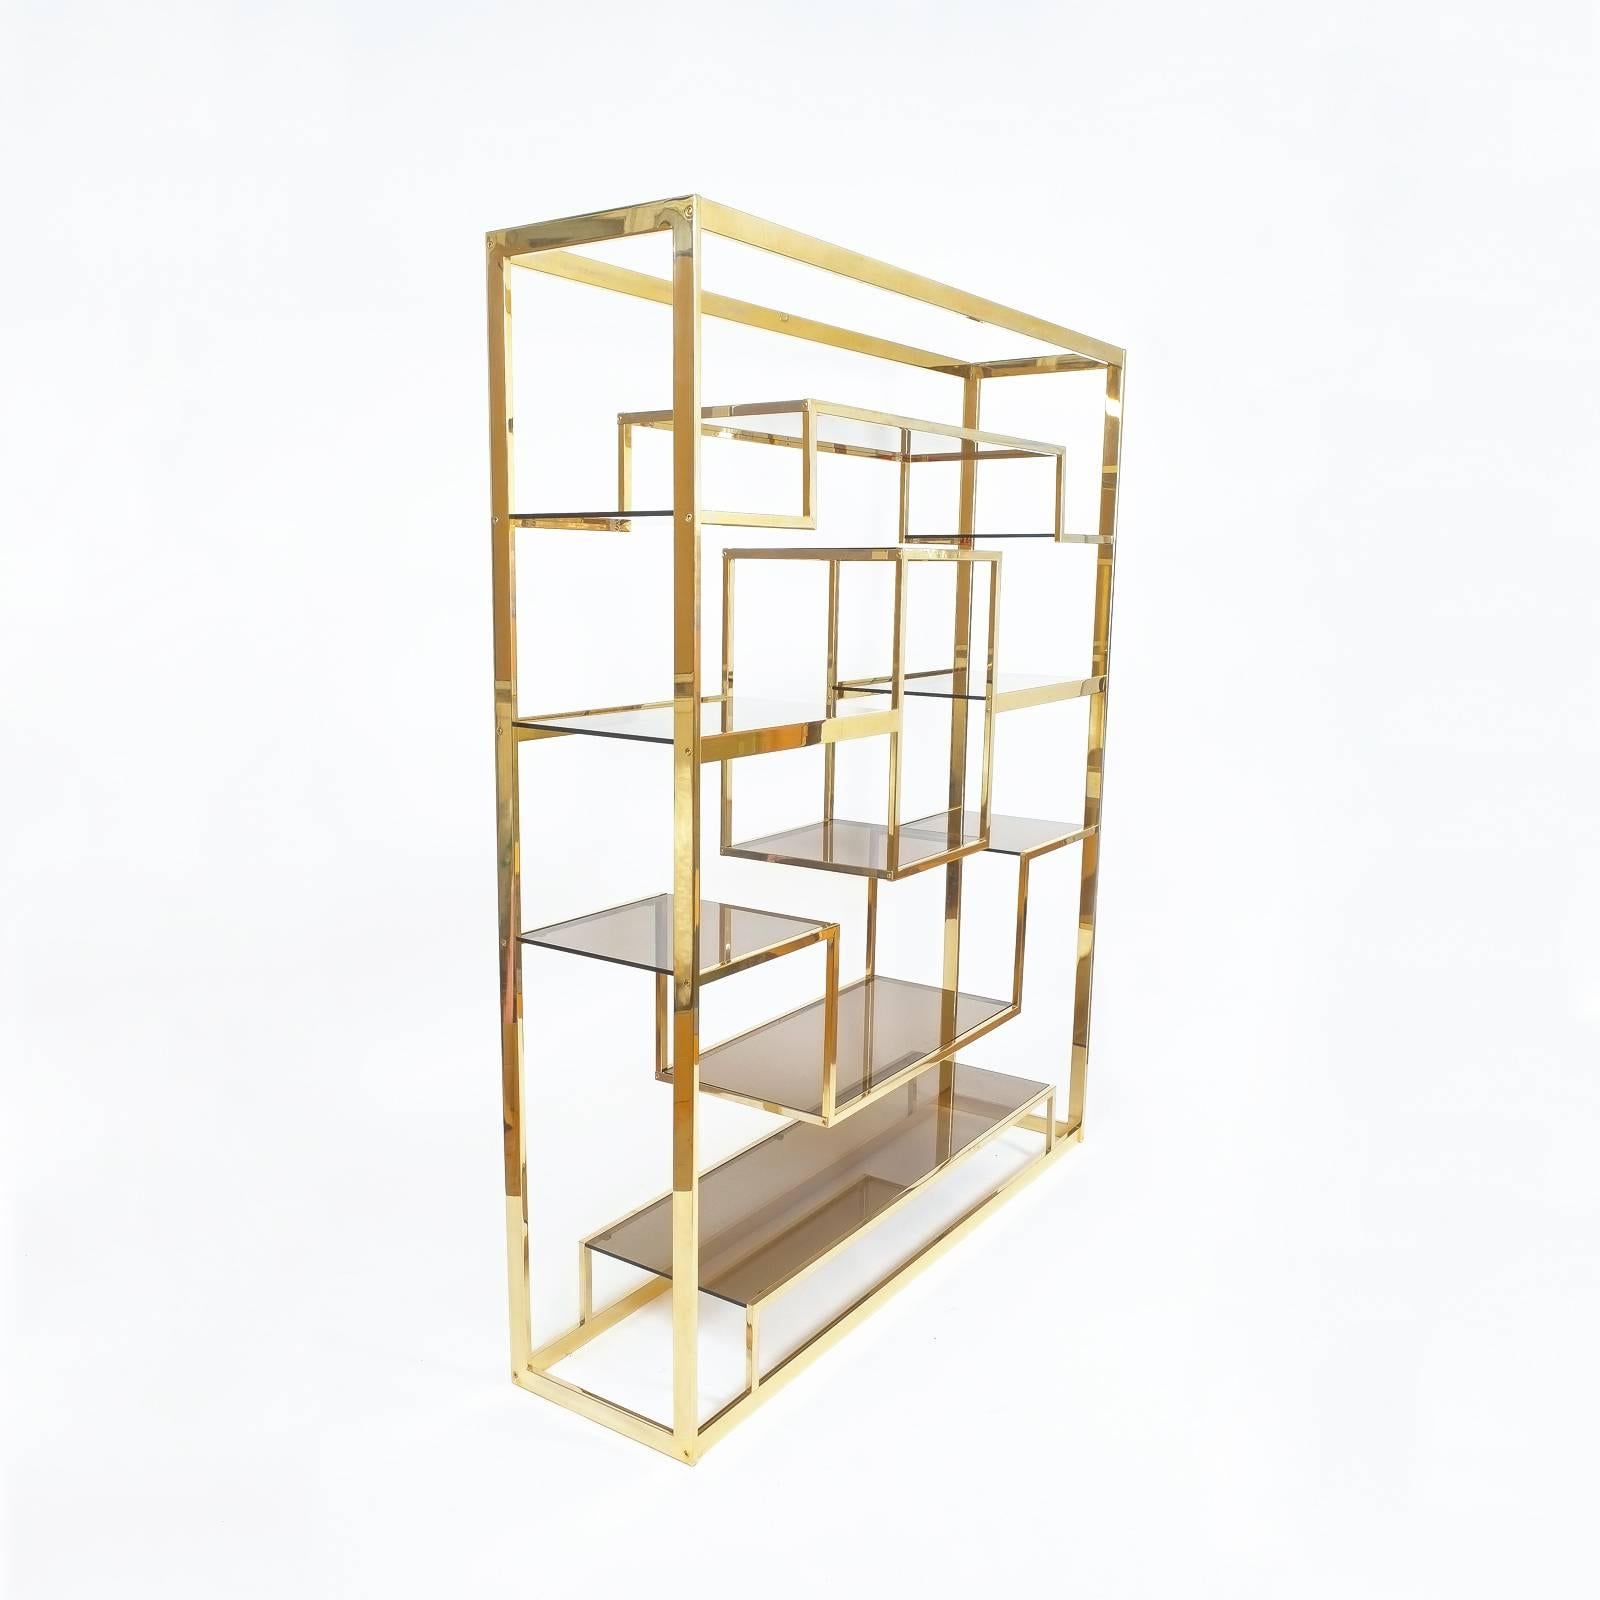 Late 20th Century Romeo Rega Etagere Brass and Glass Room Divider